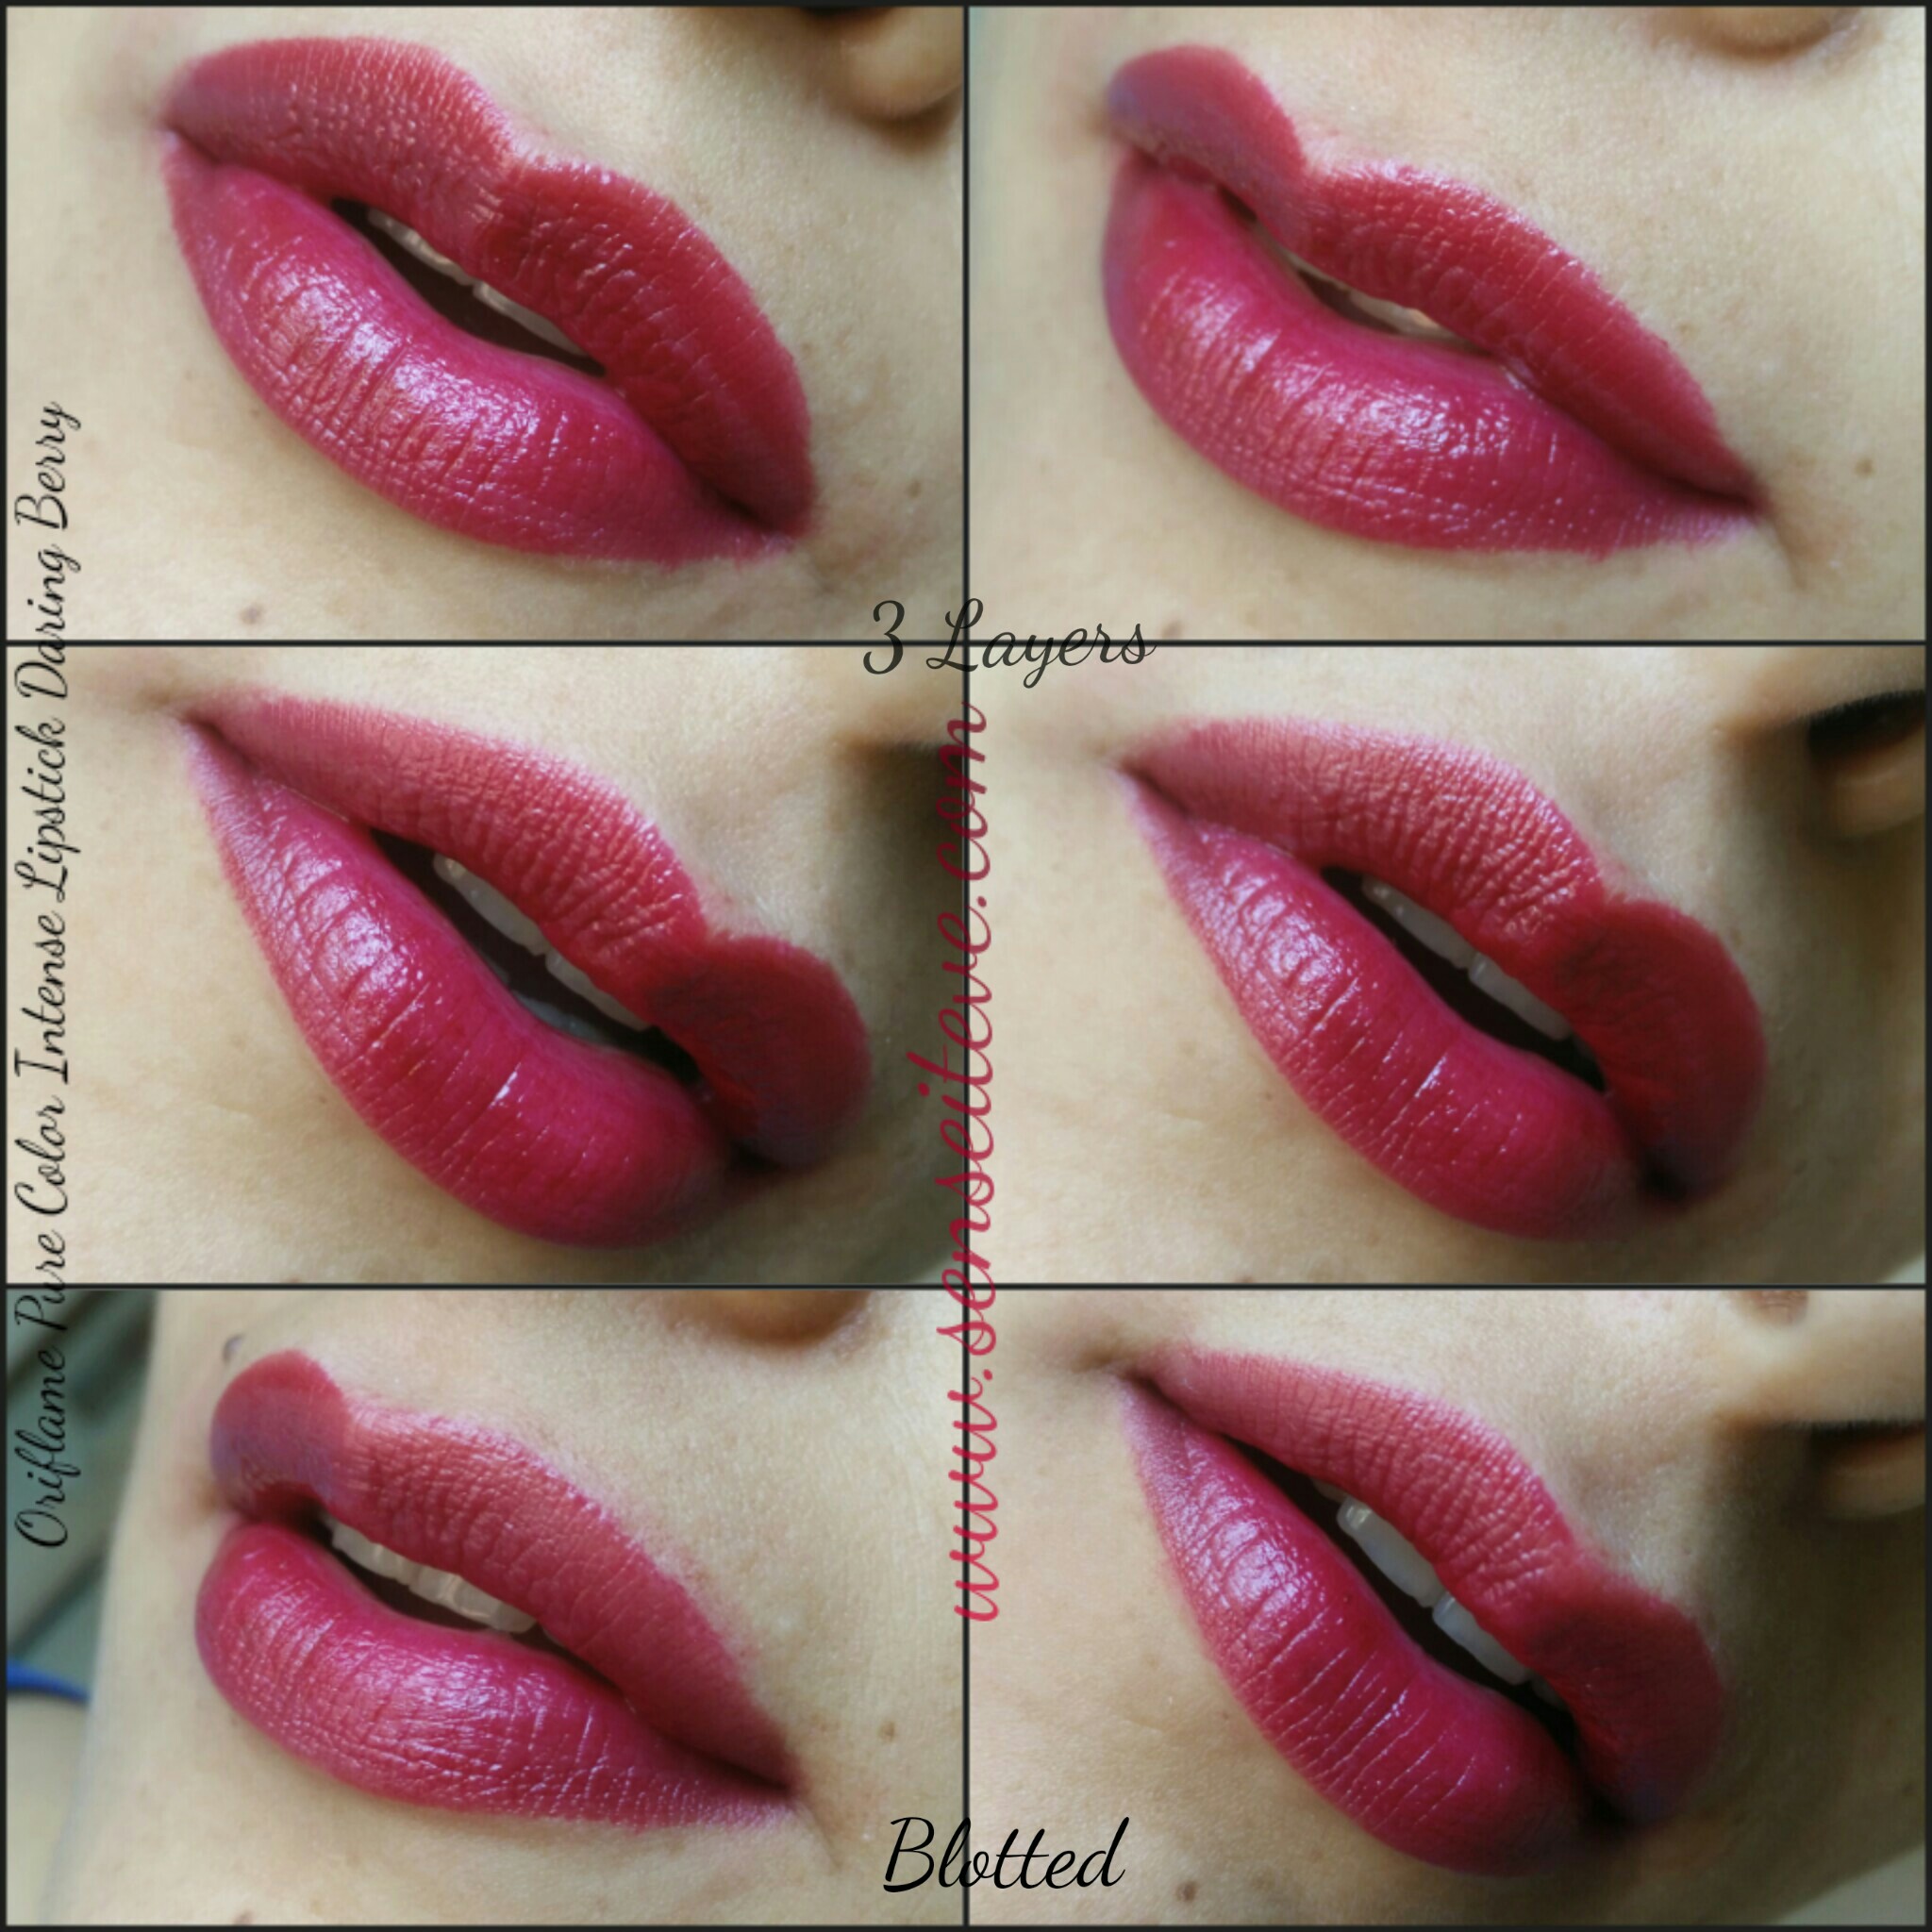 Oriflame Pure Color Intense Lipstick Daring Berry Swatches 26657